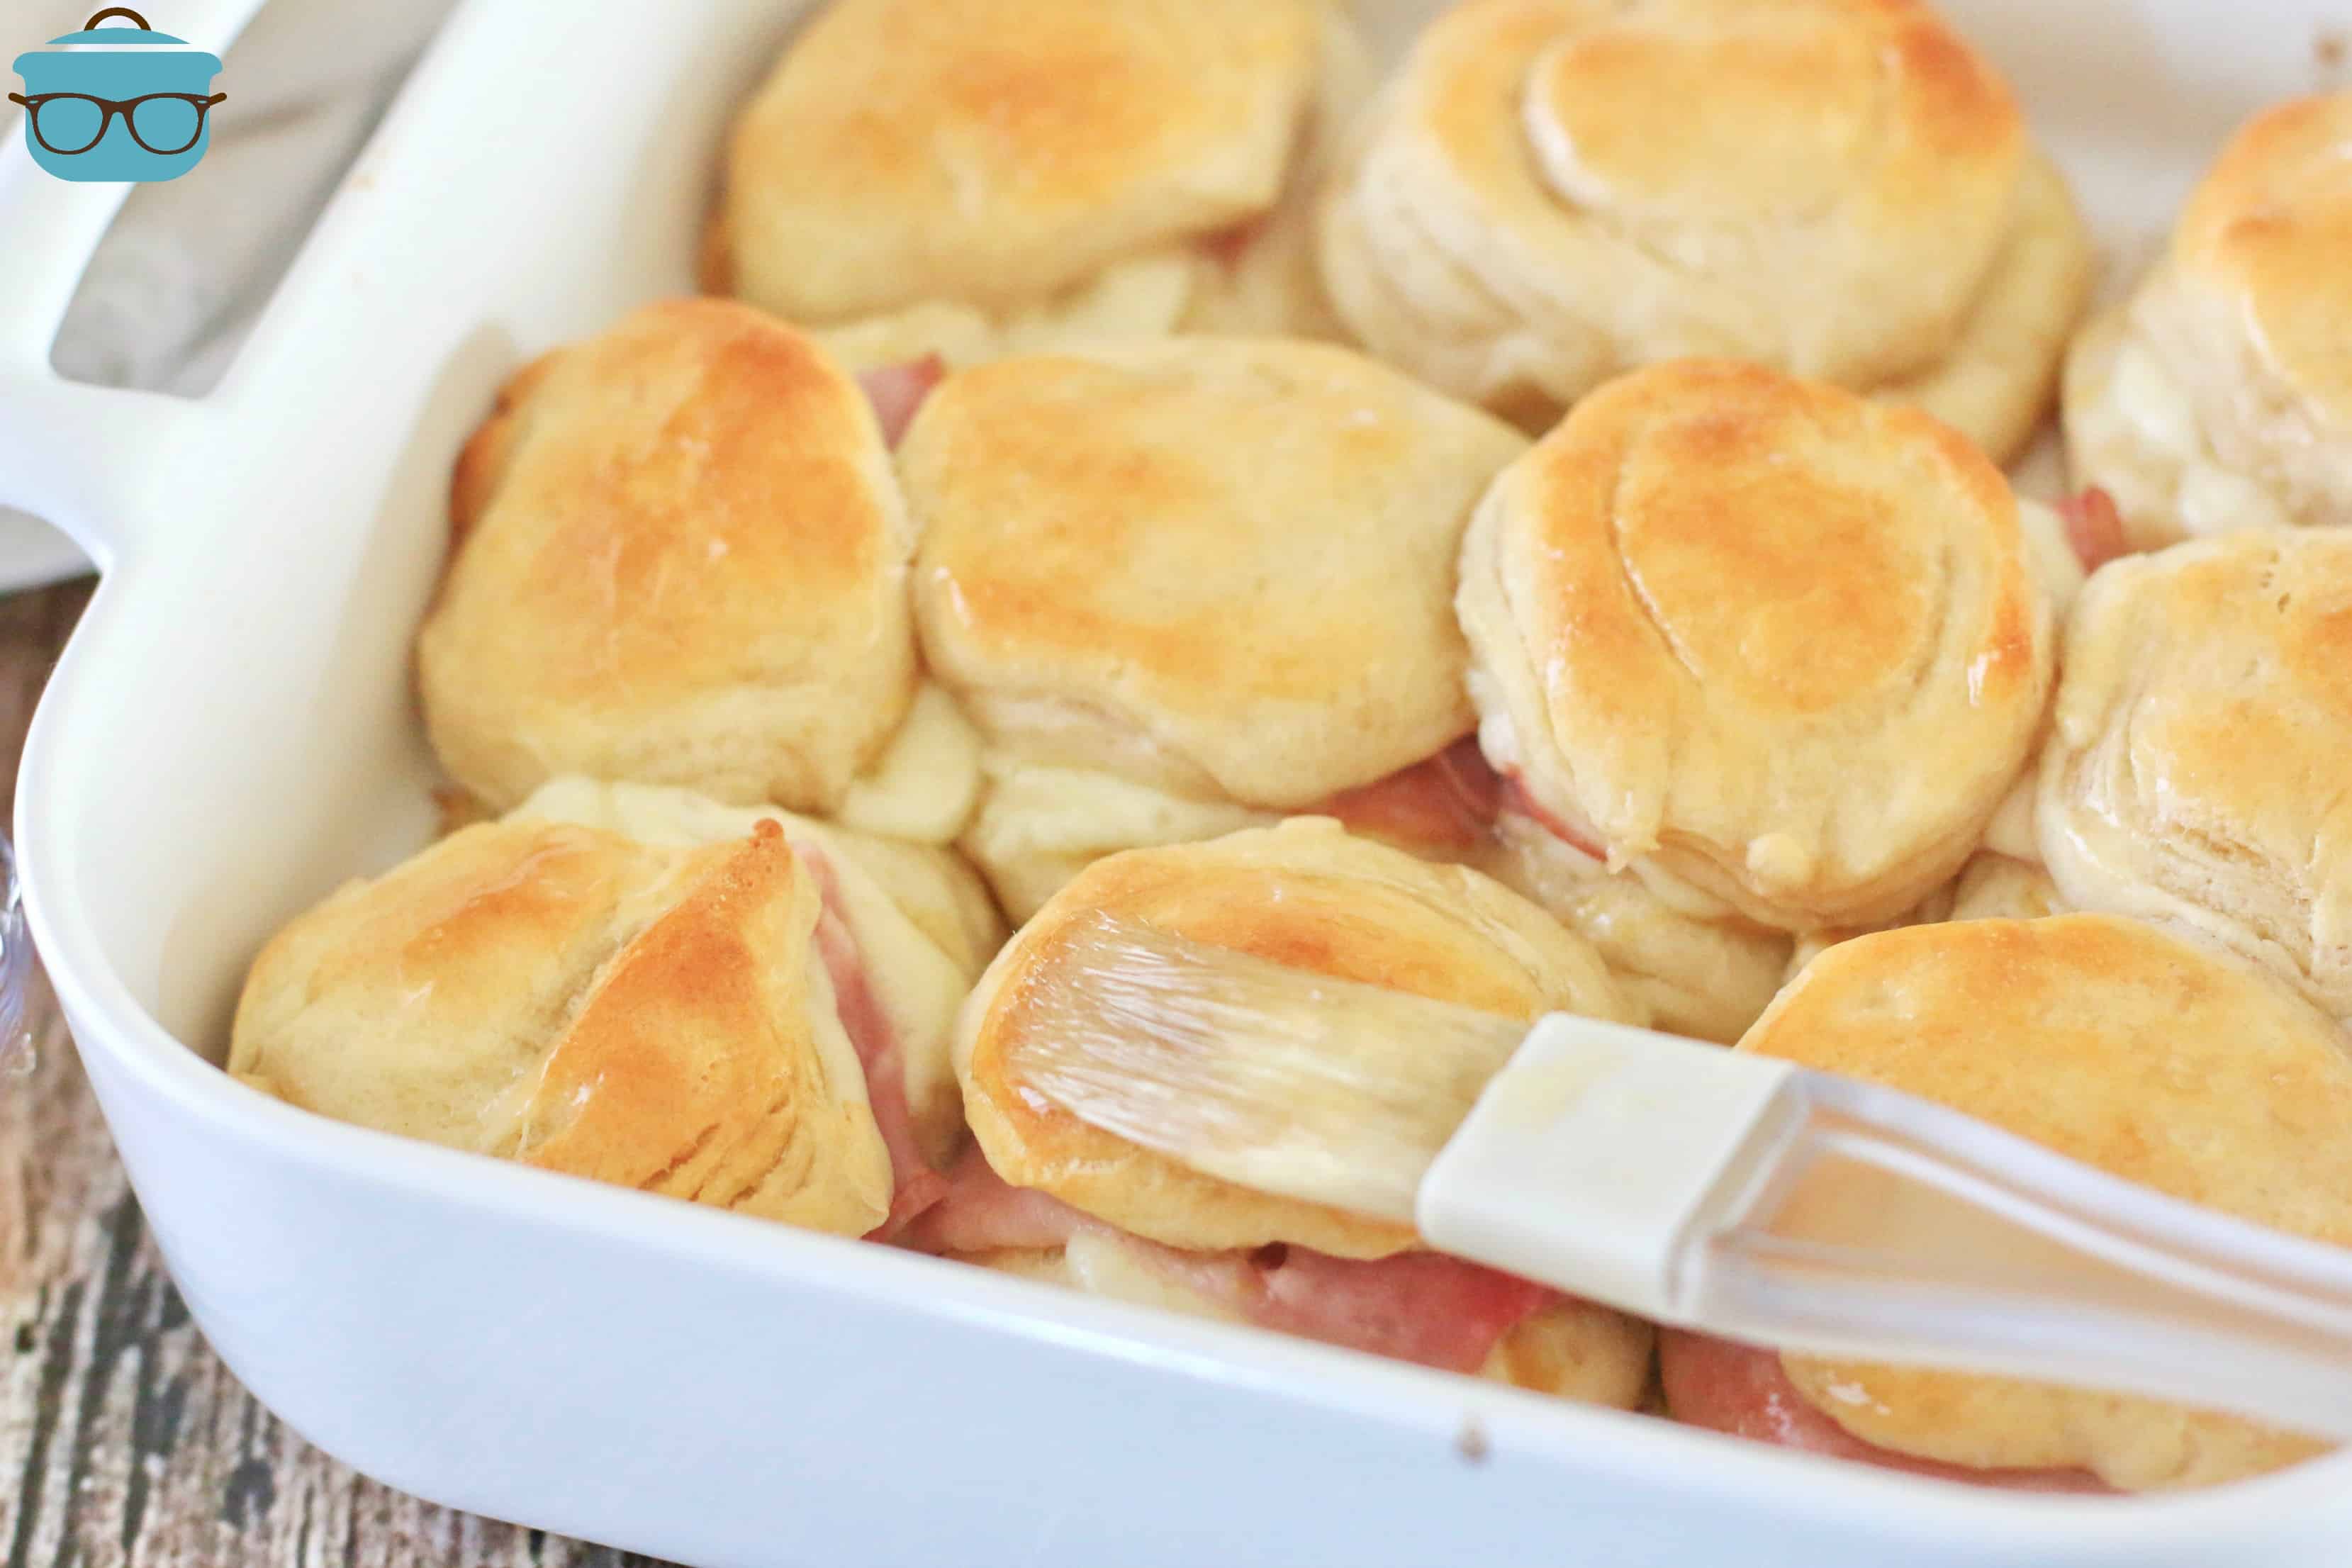 spreading warm honey on cooked ham biscuits.